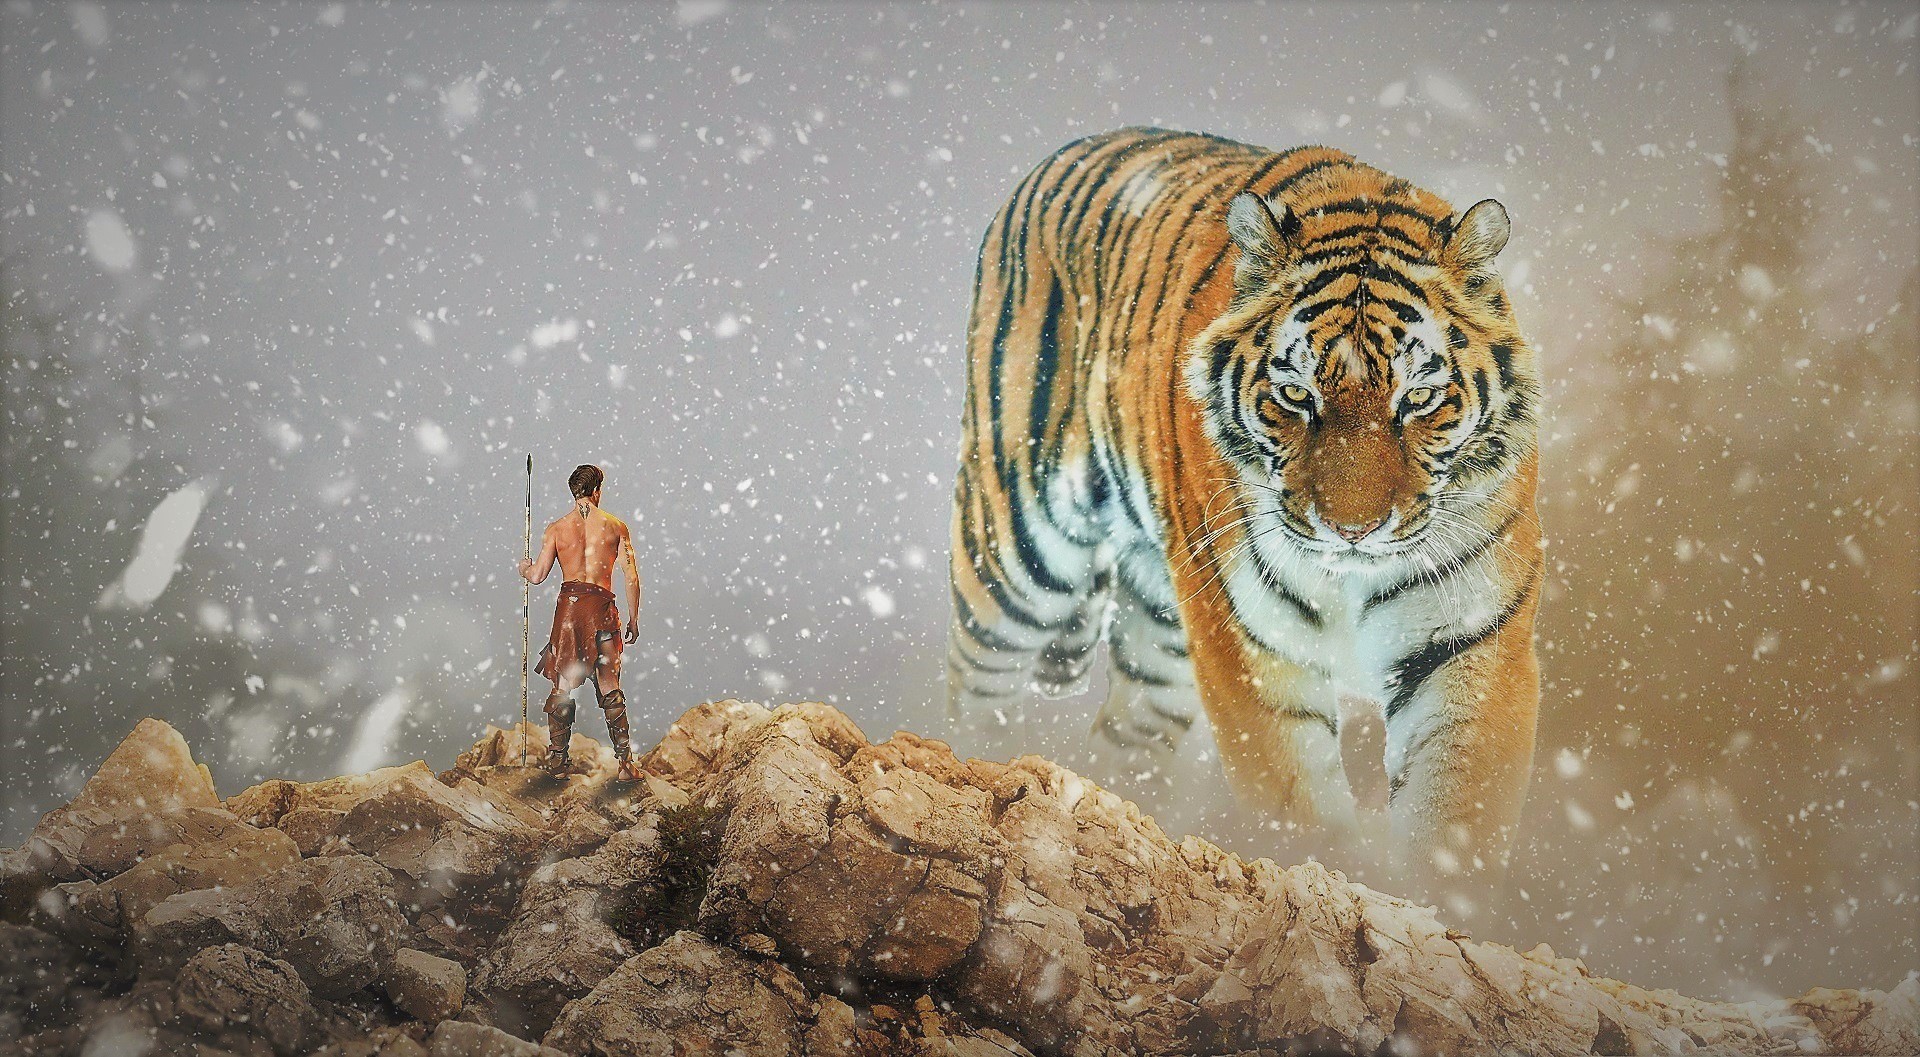 Warrior and Giant Tiger